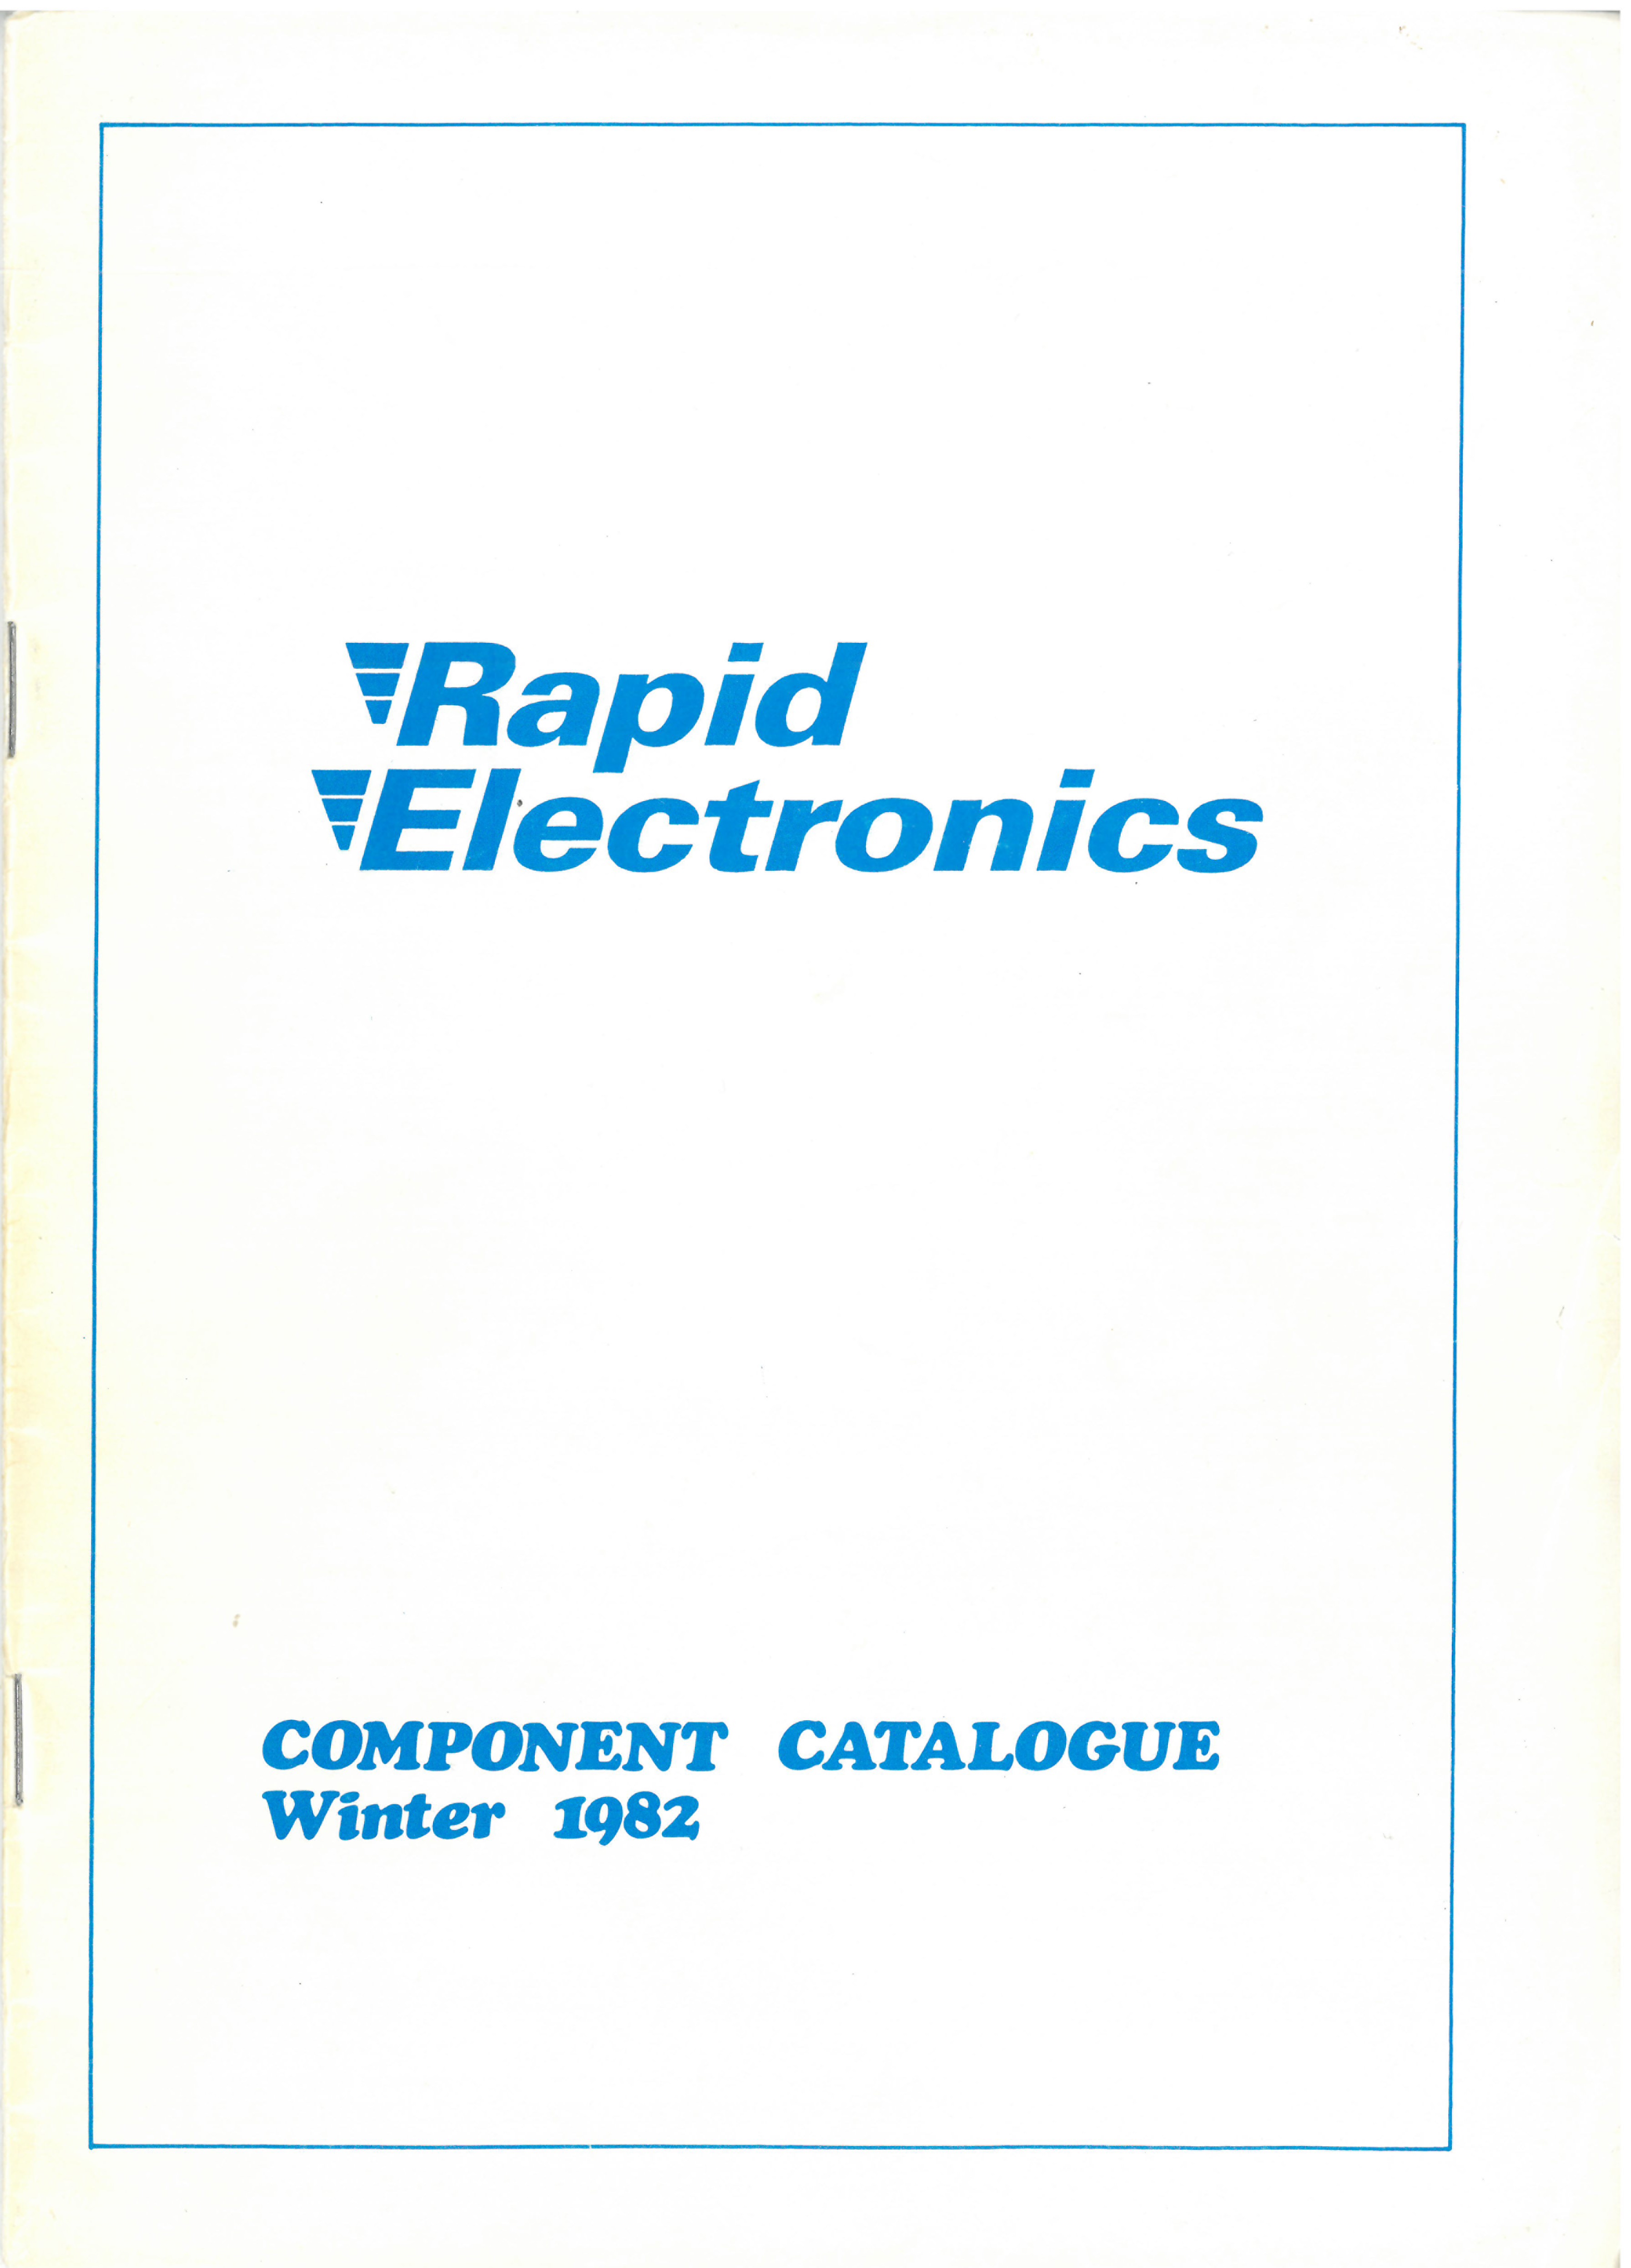 1982 - First catalogue printed